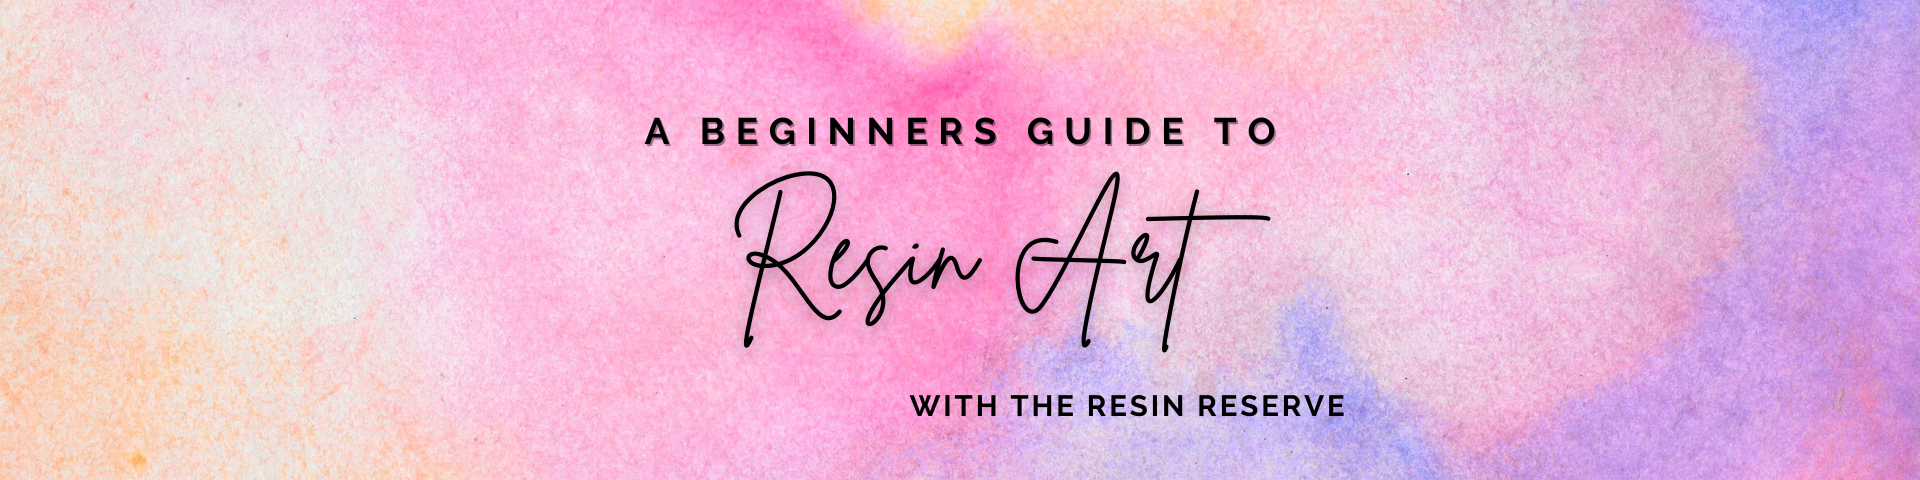 Resin Art - The Beginner's Guide to Creating Art with Resin